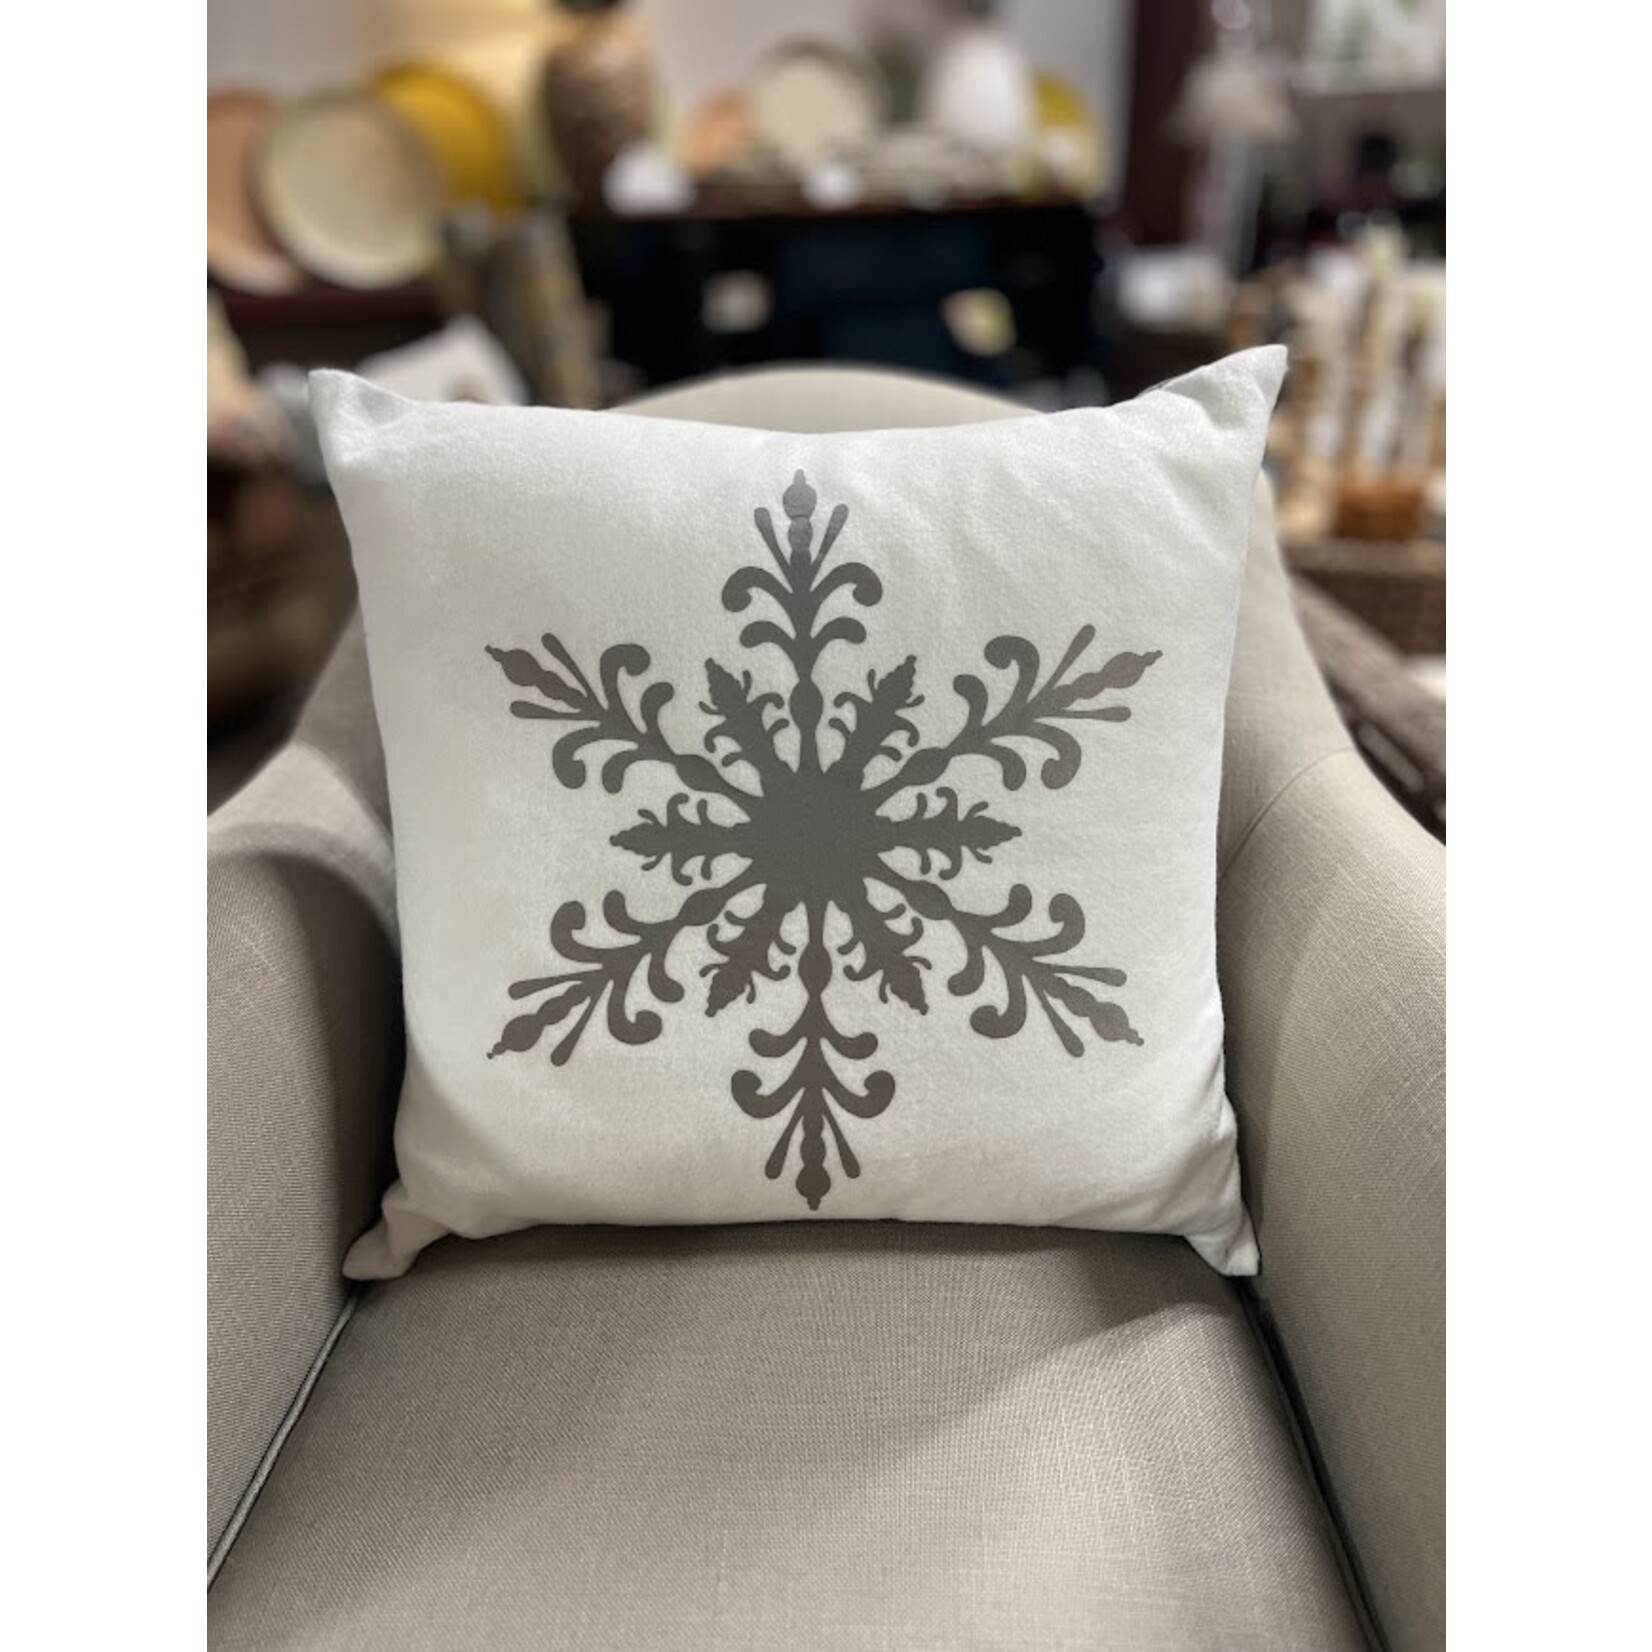 Eastern Accents Narnia Snow Flake Pillow 22x22